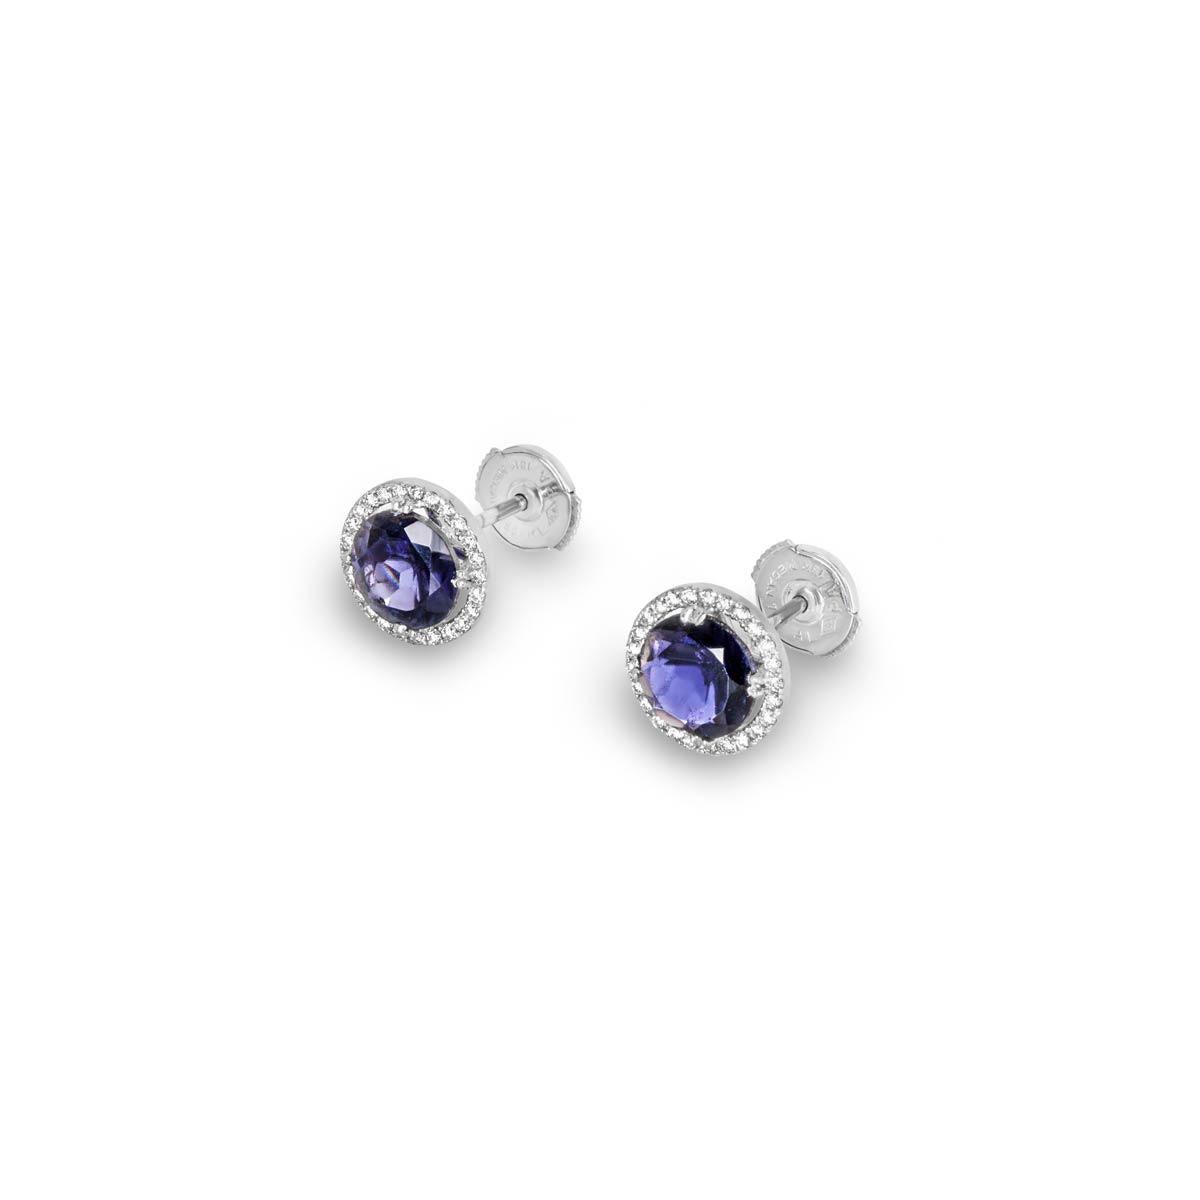 A beautiful pair of 18k white gold diamond and iolite earrings. The earrings are each set to the centre with a round brilliant cut iolite gemstone in total weighing 3.11ct with a deep blueish-purple. Complementing the central stone is a halo of 25